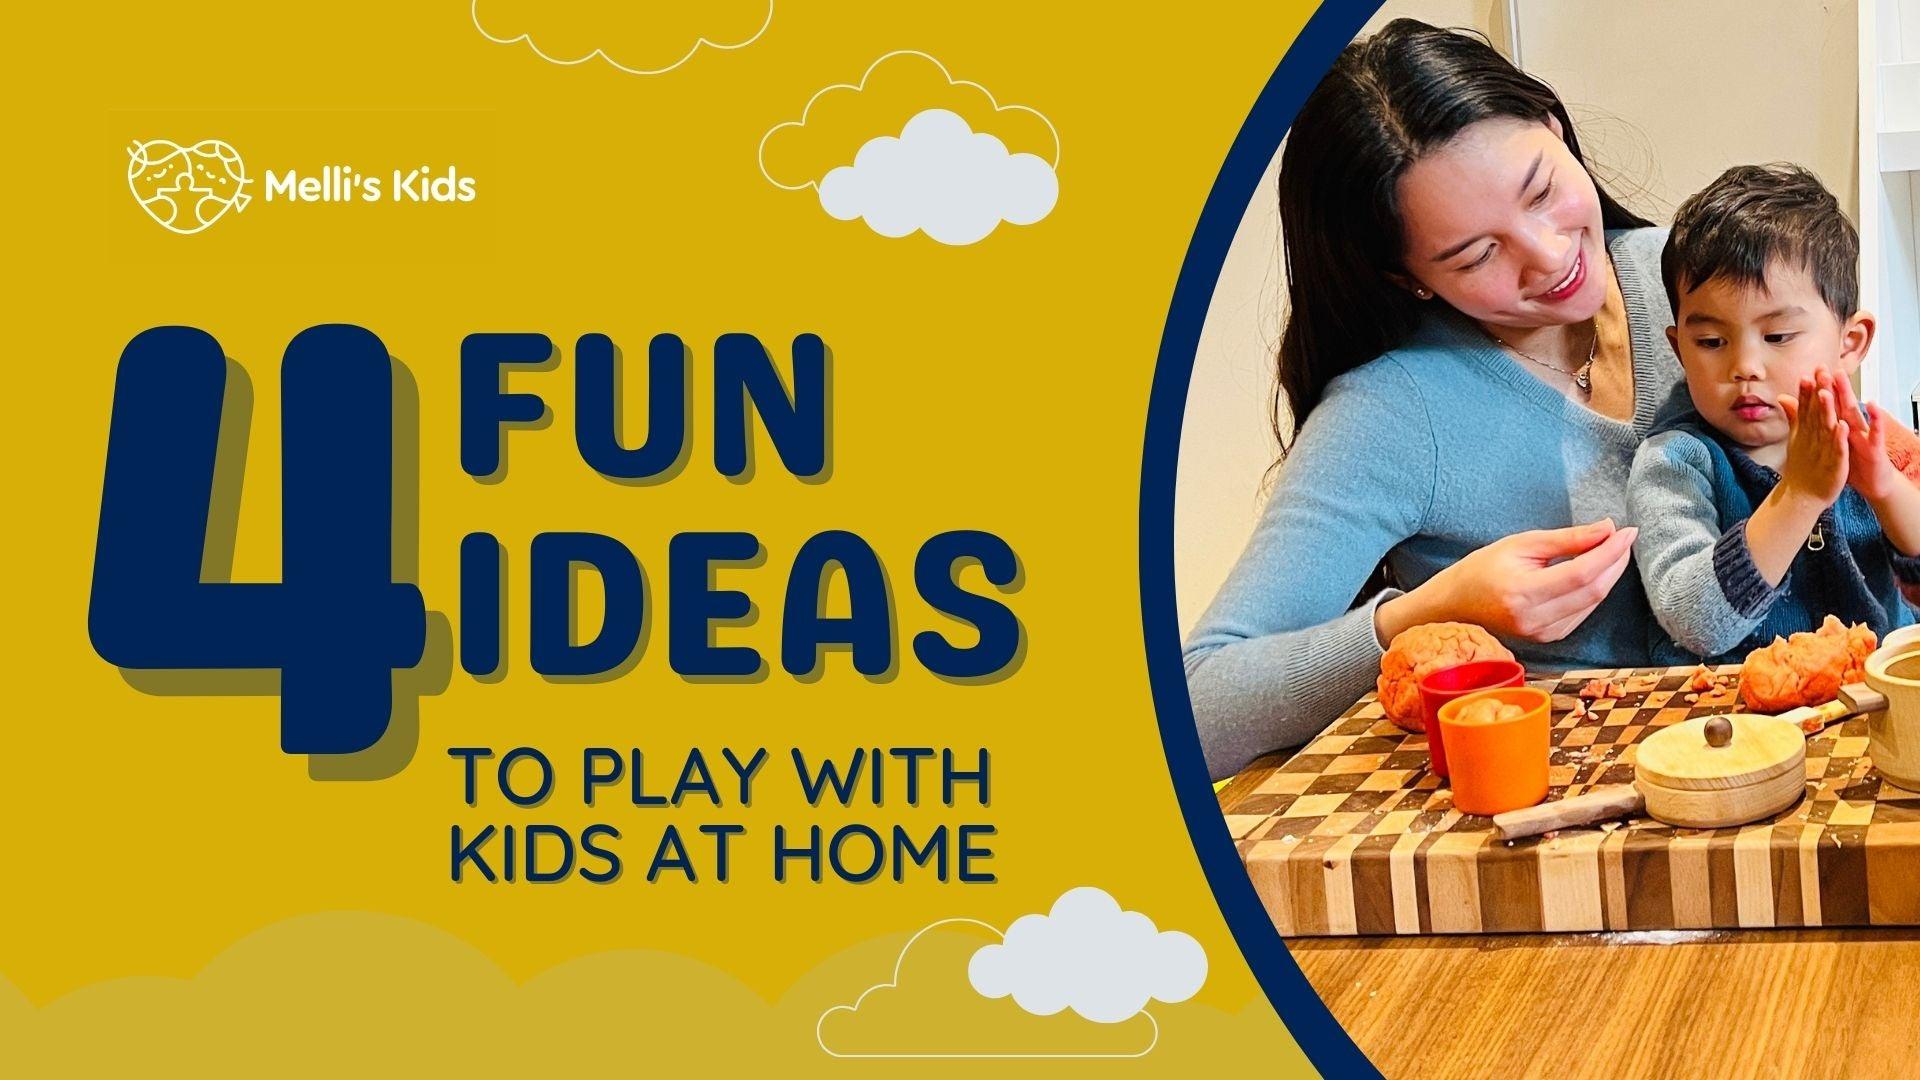 4 fun ideas to play with kids at home - Melli's Kids